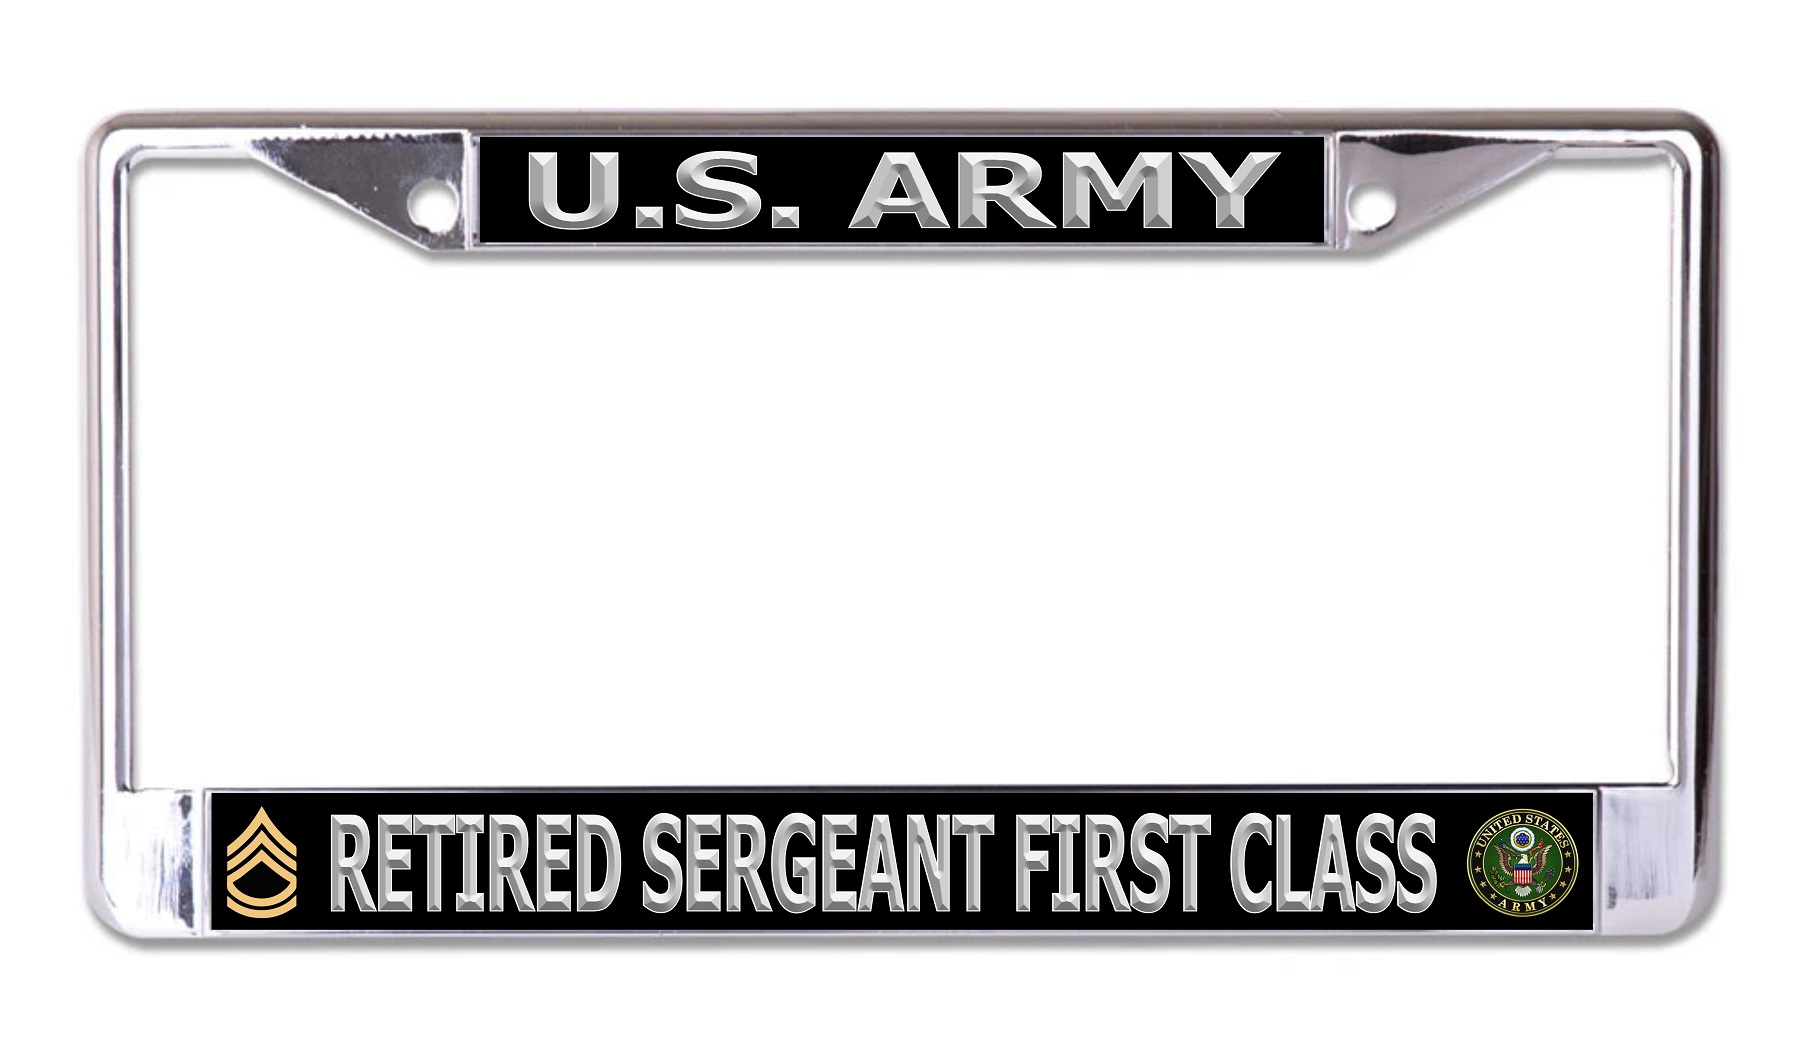 U.S. Army Retired Sergeant First Class Silver Letters Chrome License Plate FRAME